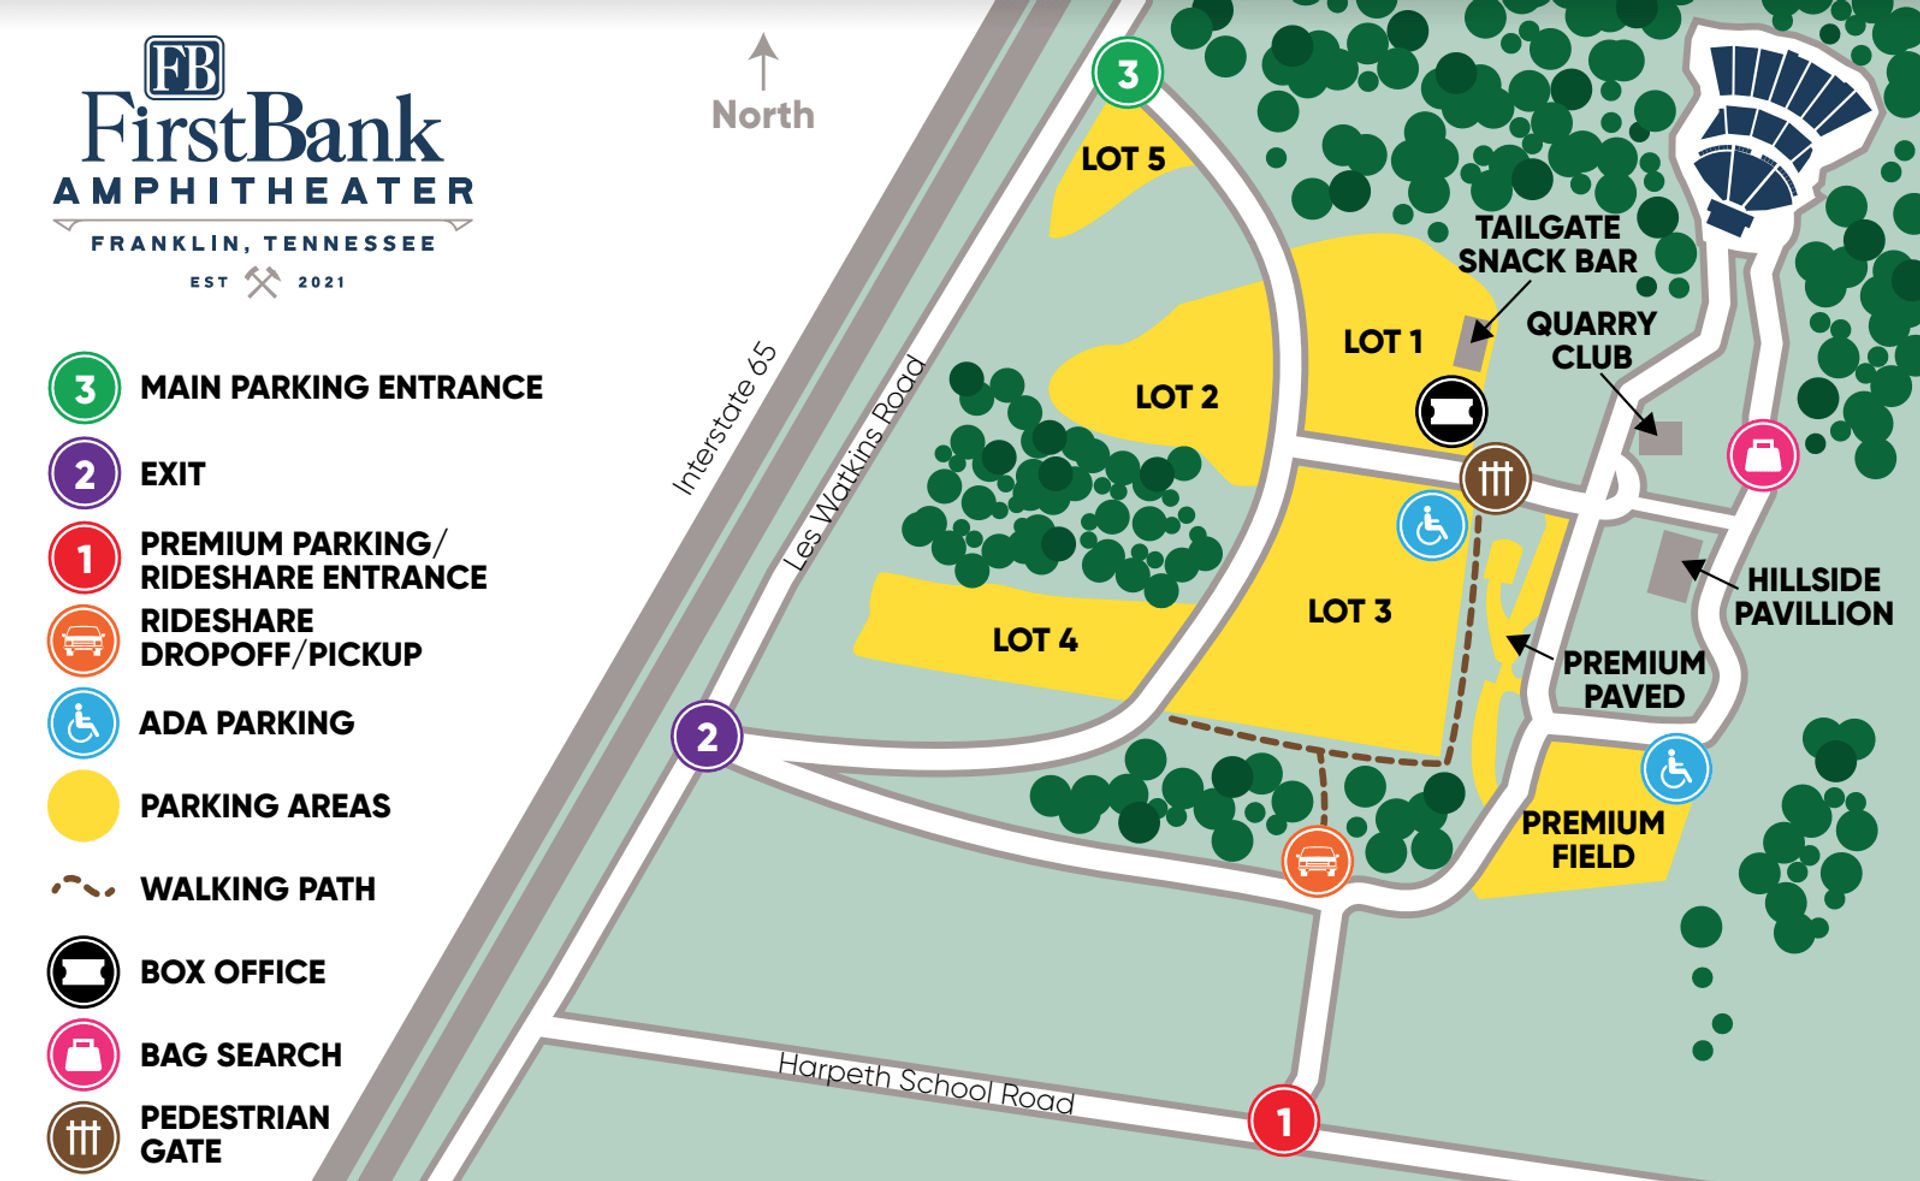 image of amphitheater venue and parking map